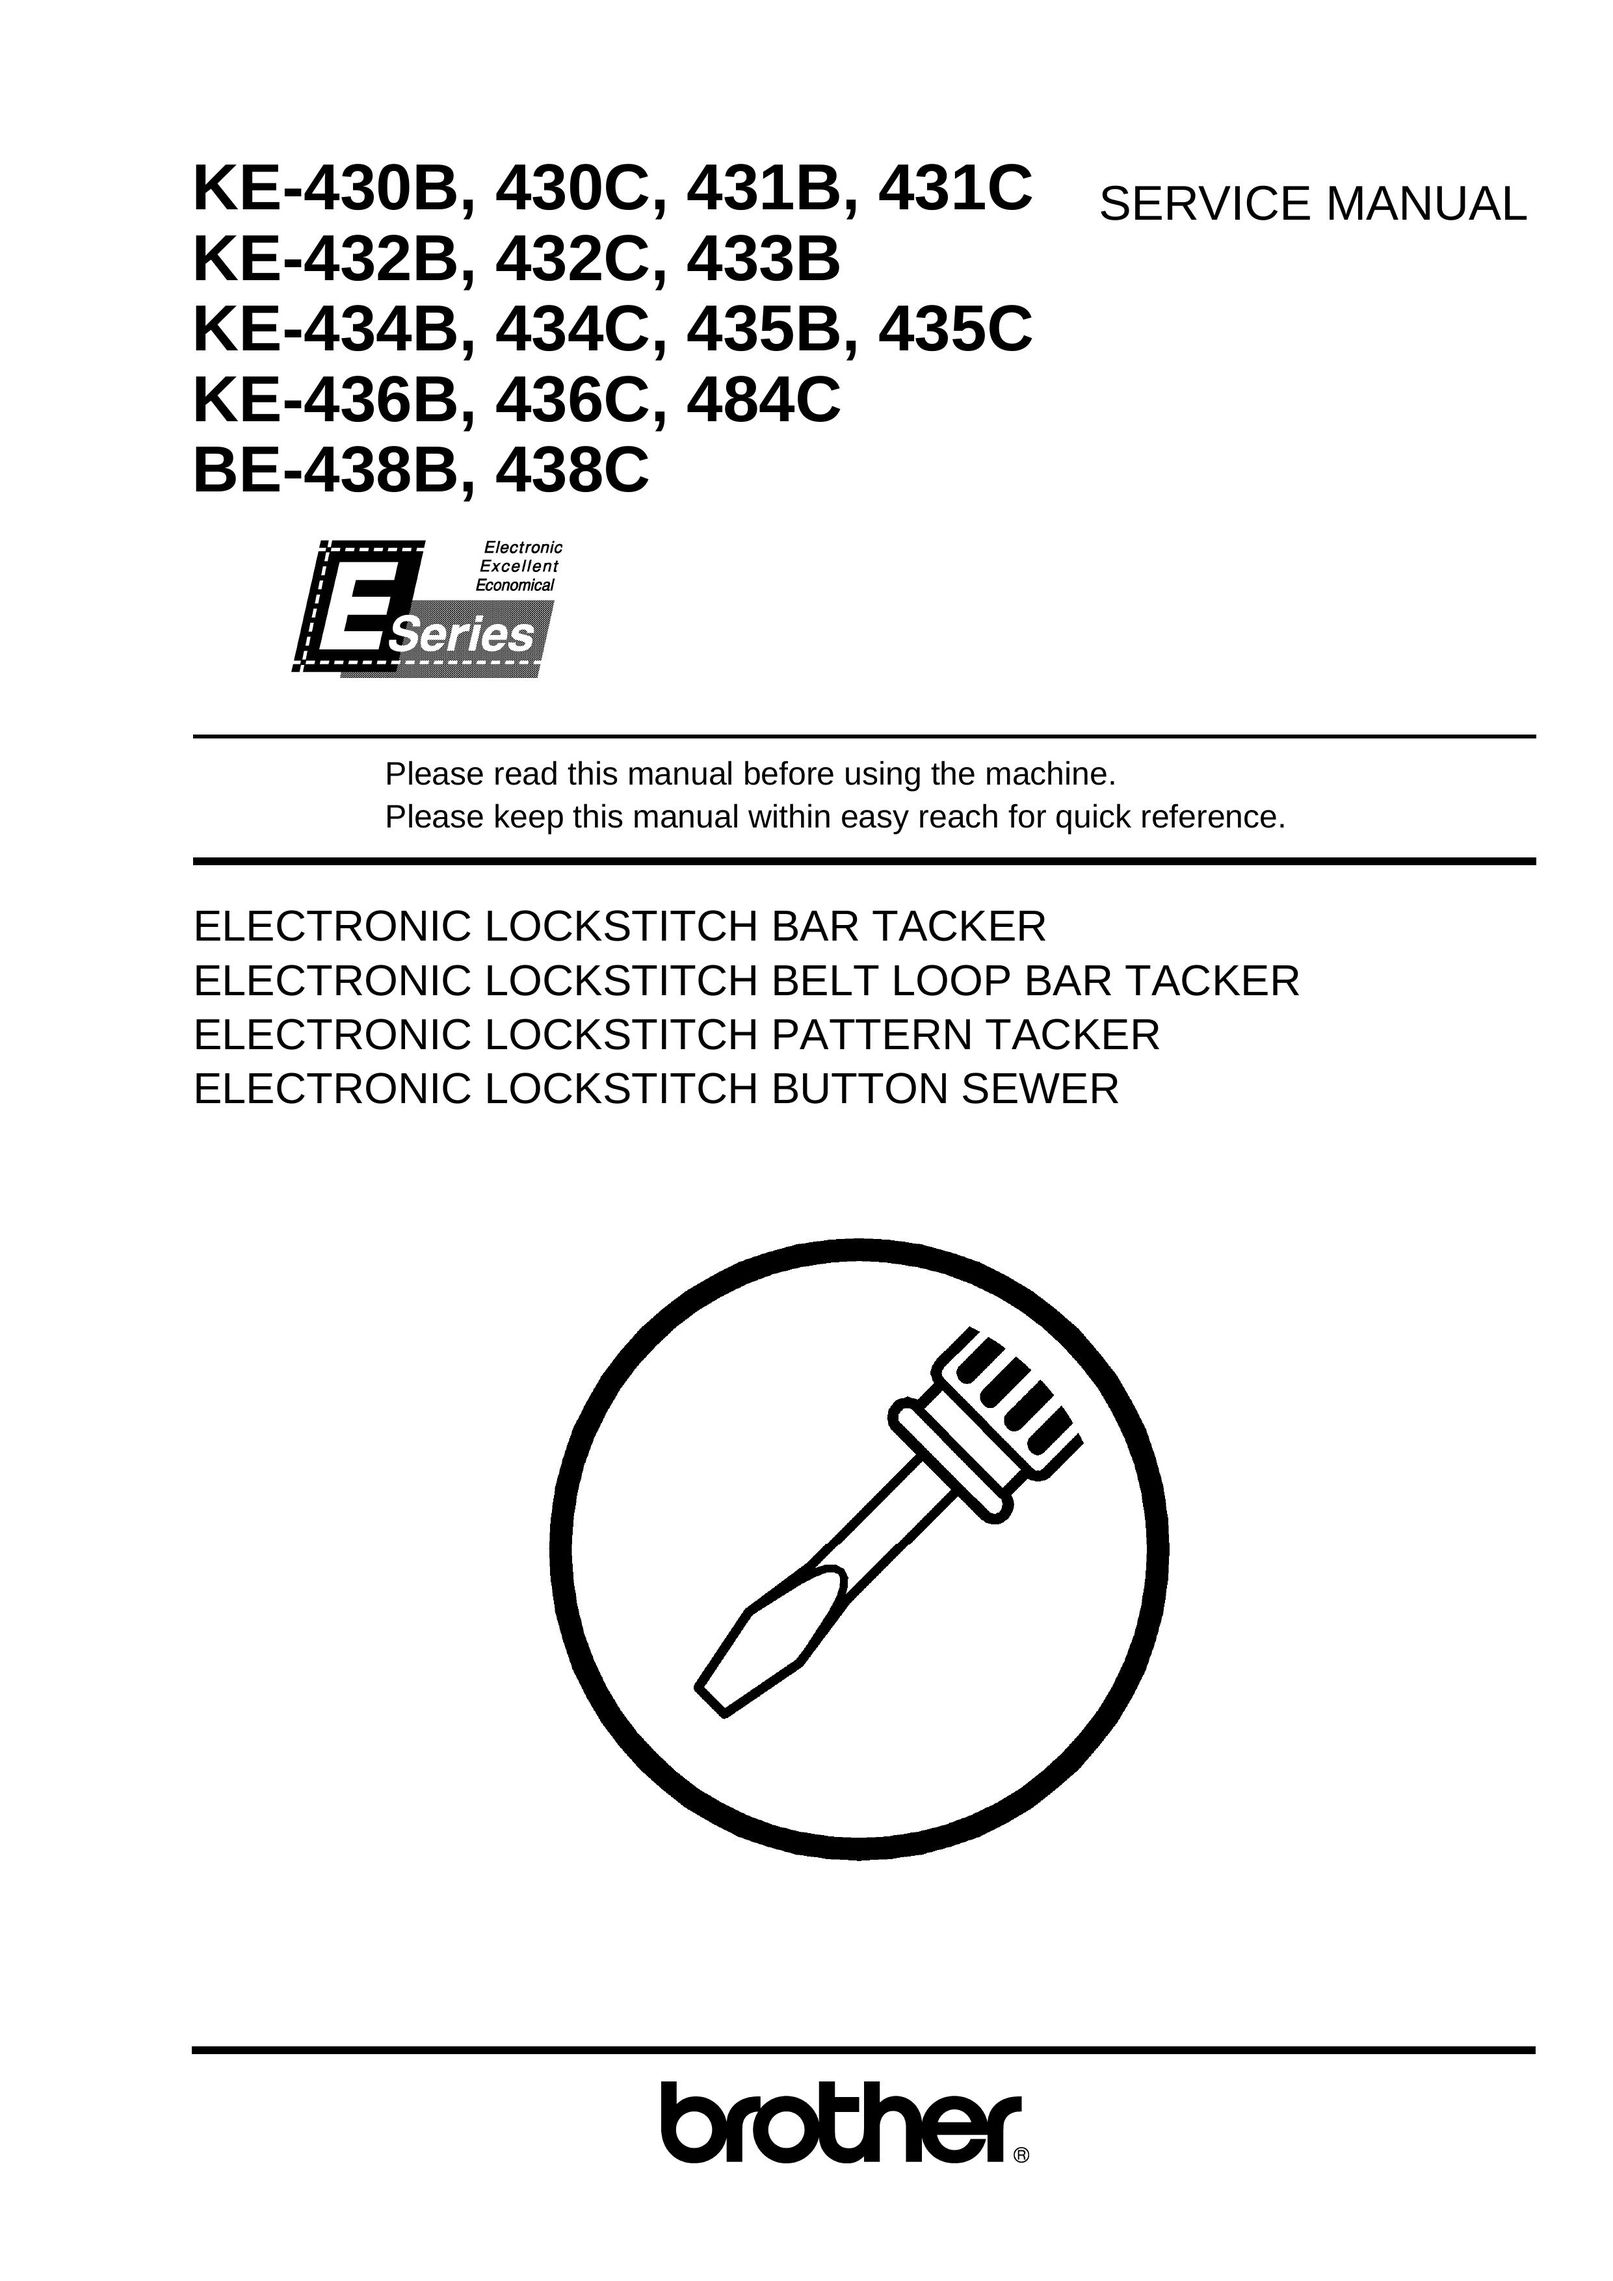 Brother 431C Sewing Machine User Manual